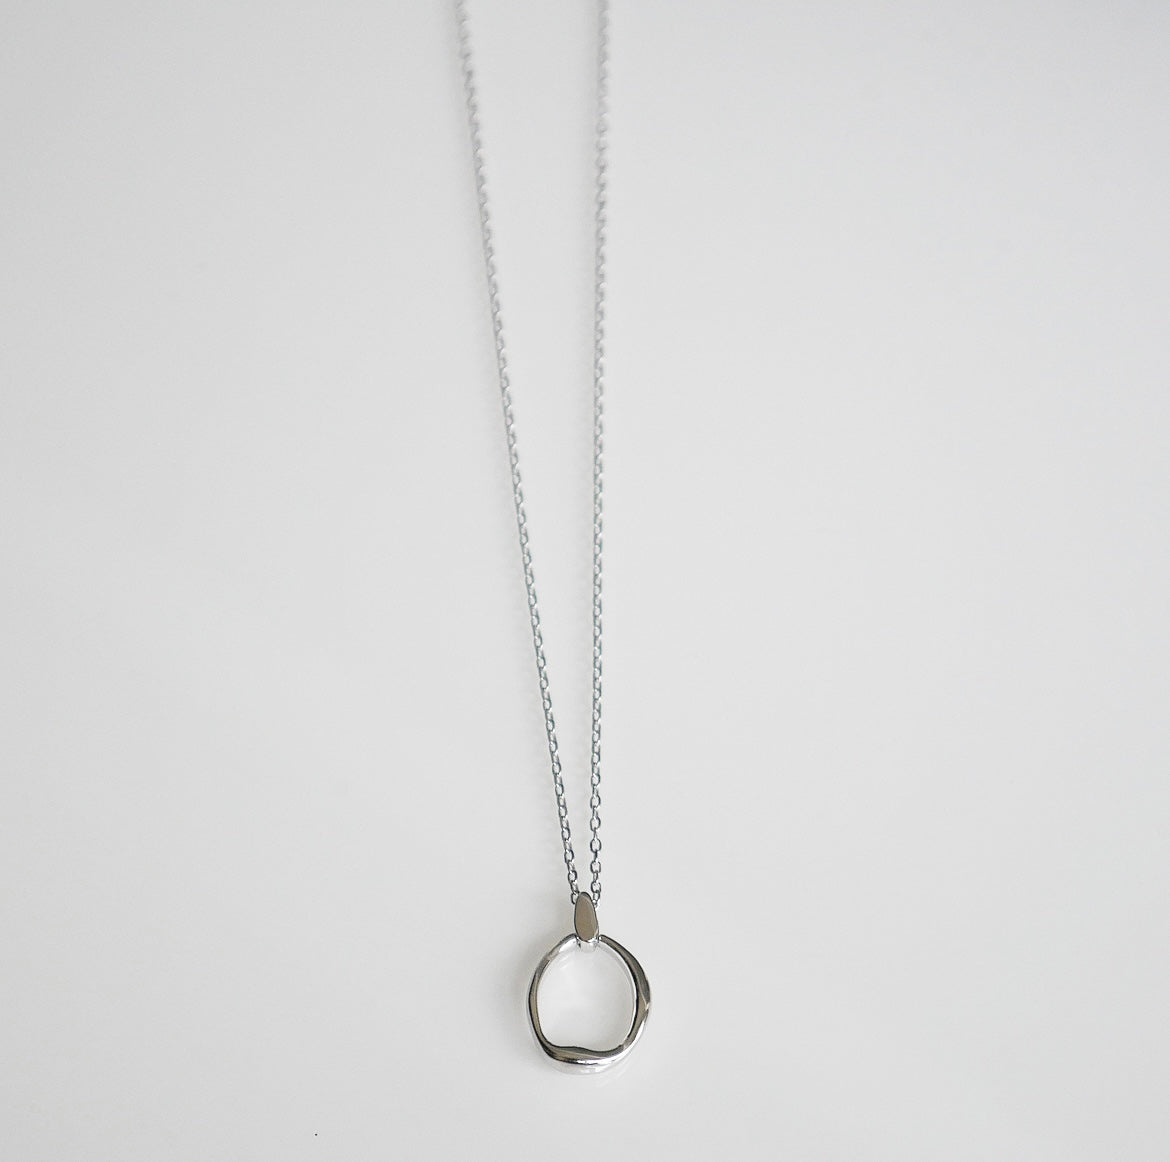 Oval Circle Necklace 925 Sterling Silver Irregular Open Oval Circle Dainty Necklace